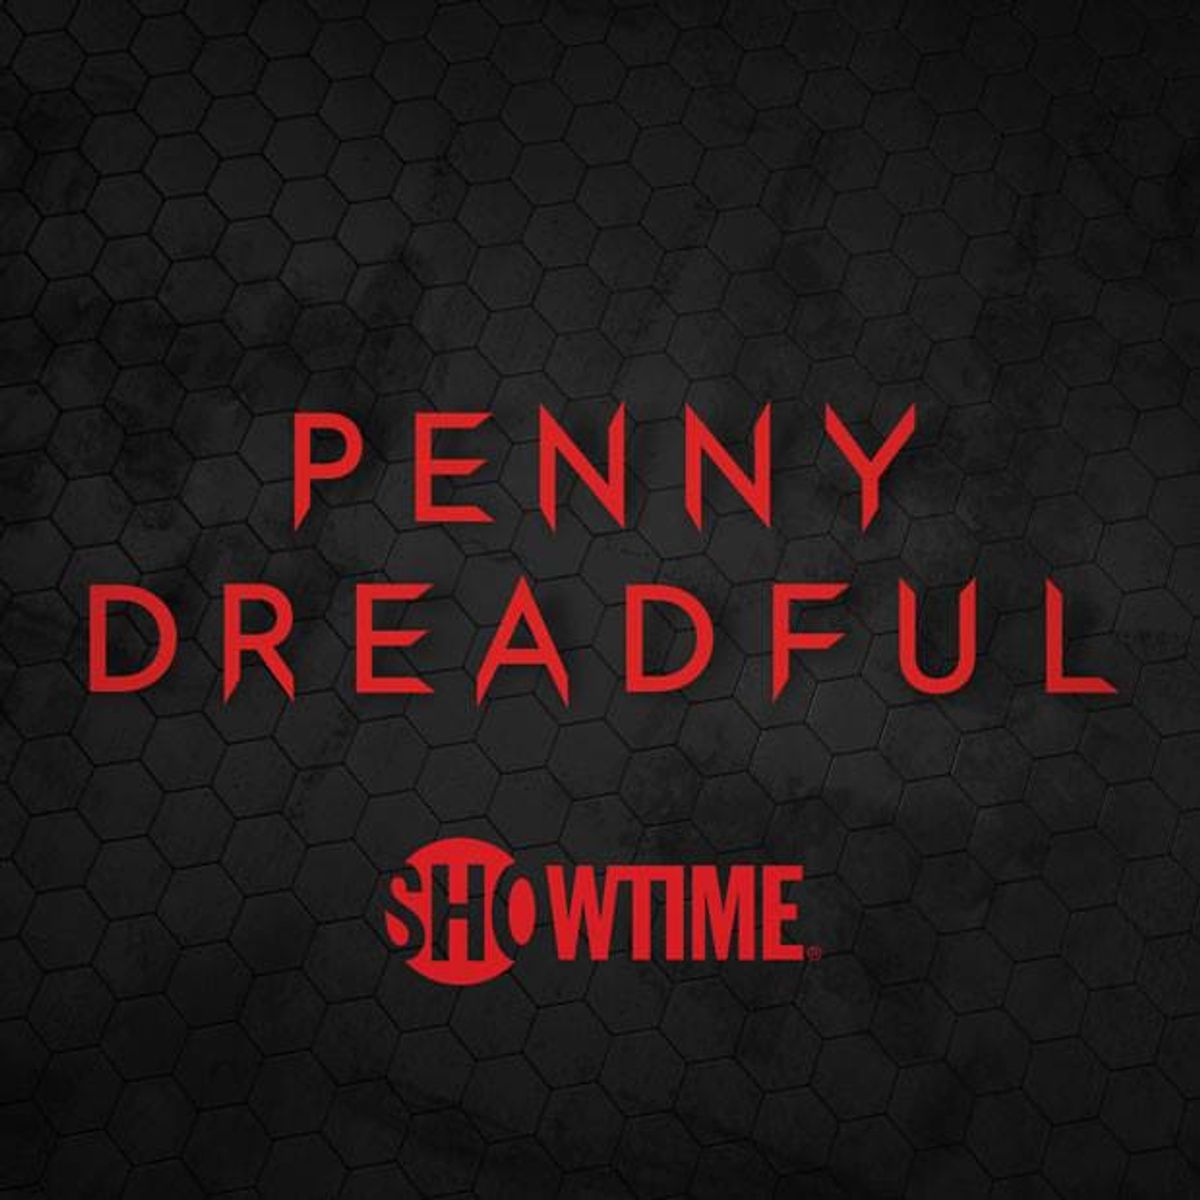 12 Reasons You Need To Watch Penny Dreadful Right Now